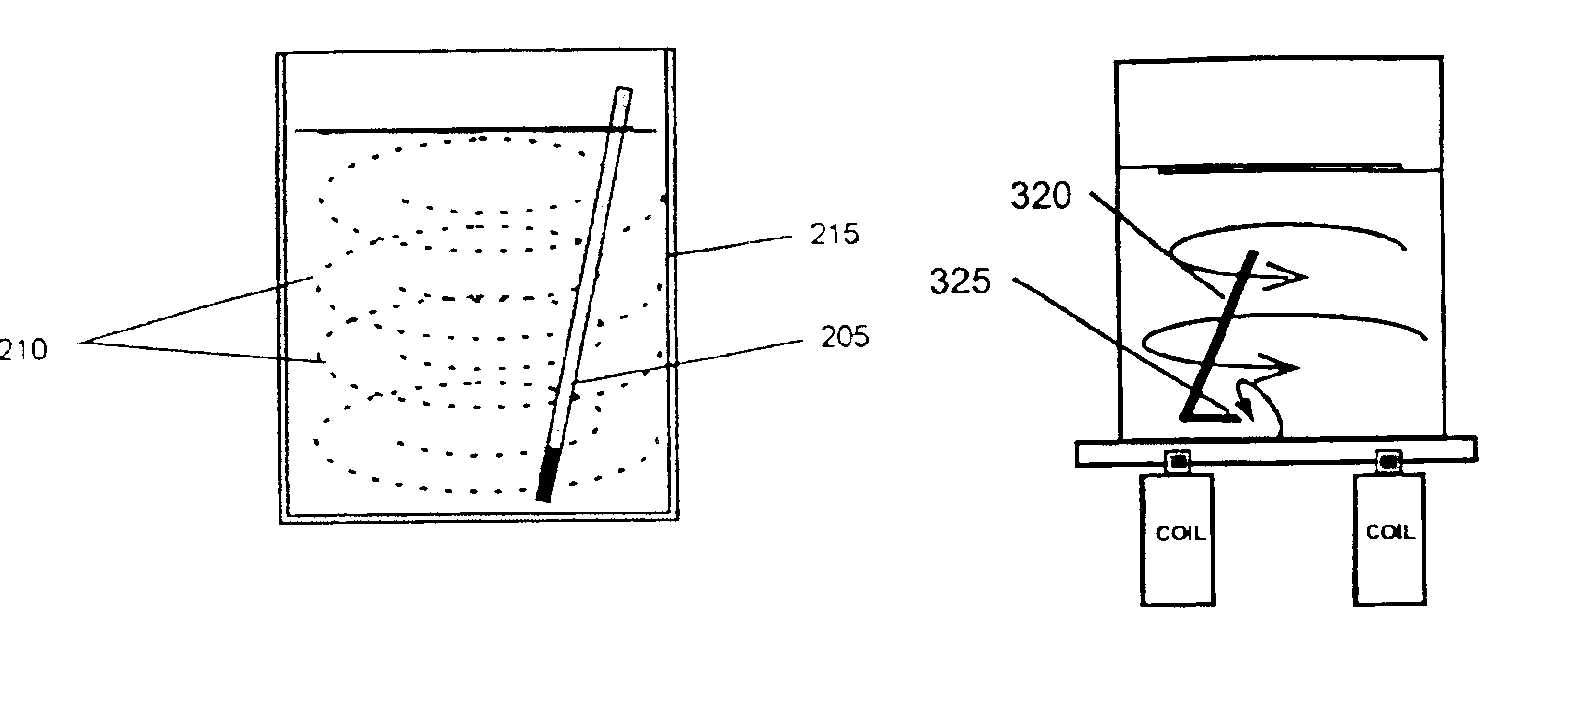 Method and apparatus for using vertical magnetic stirring to produce turbulent and chaotic mixing in various states, without compromising components